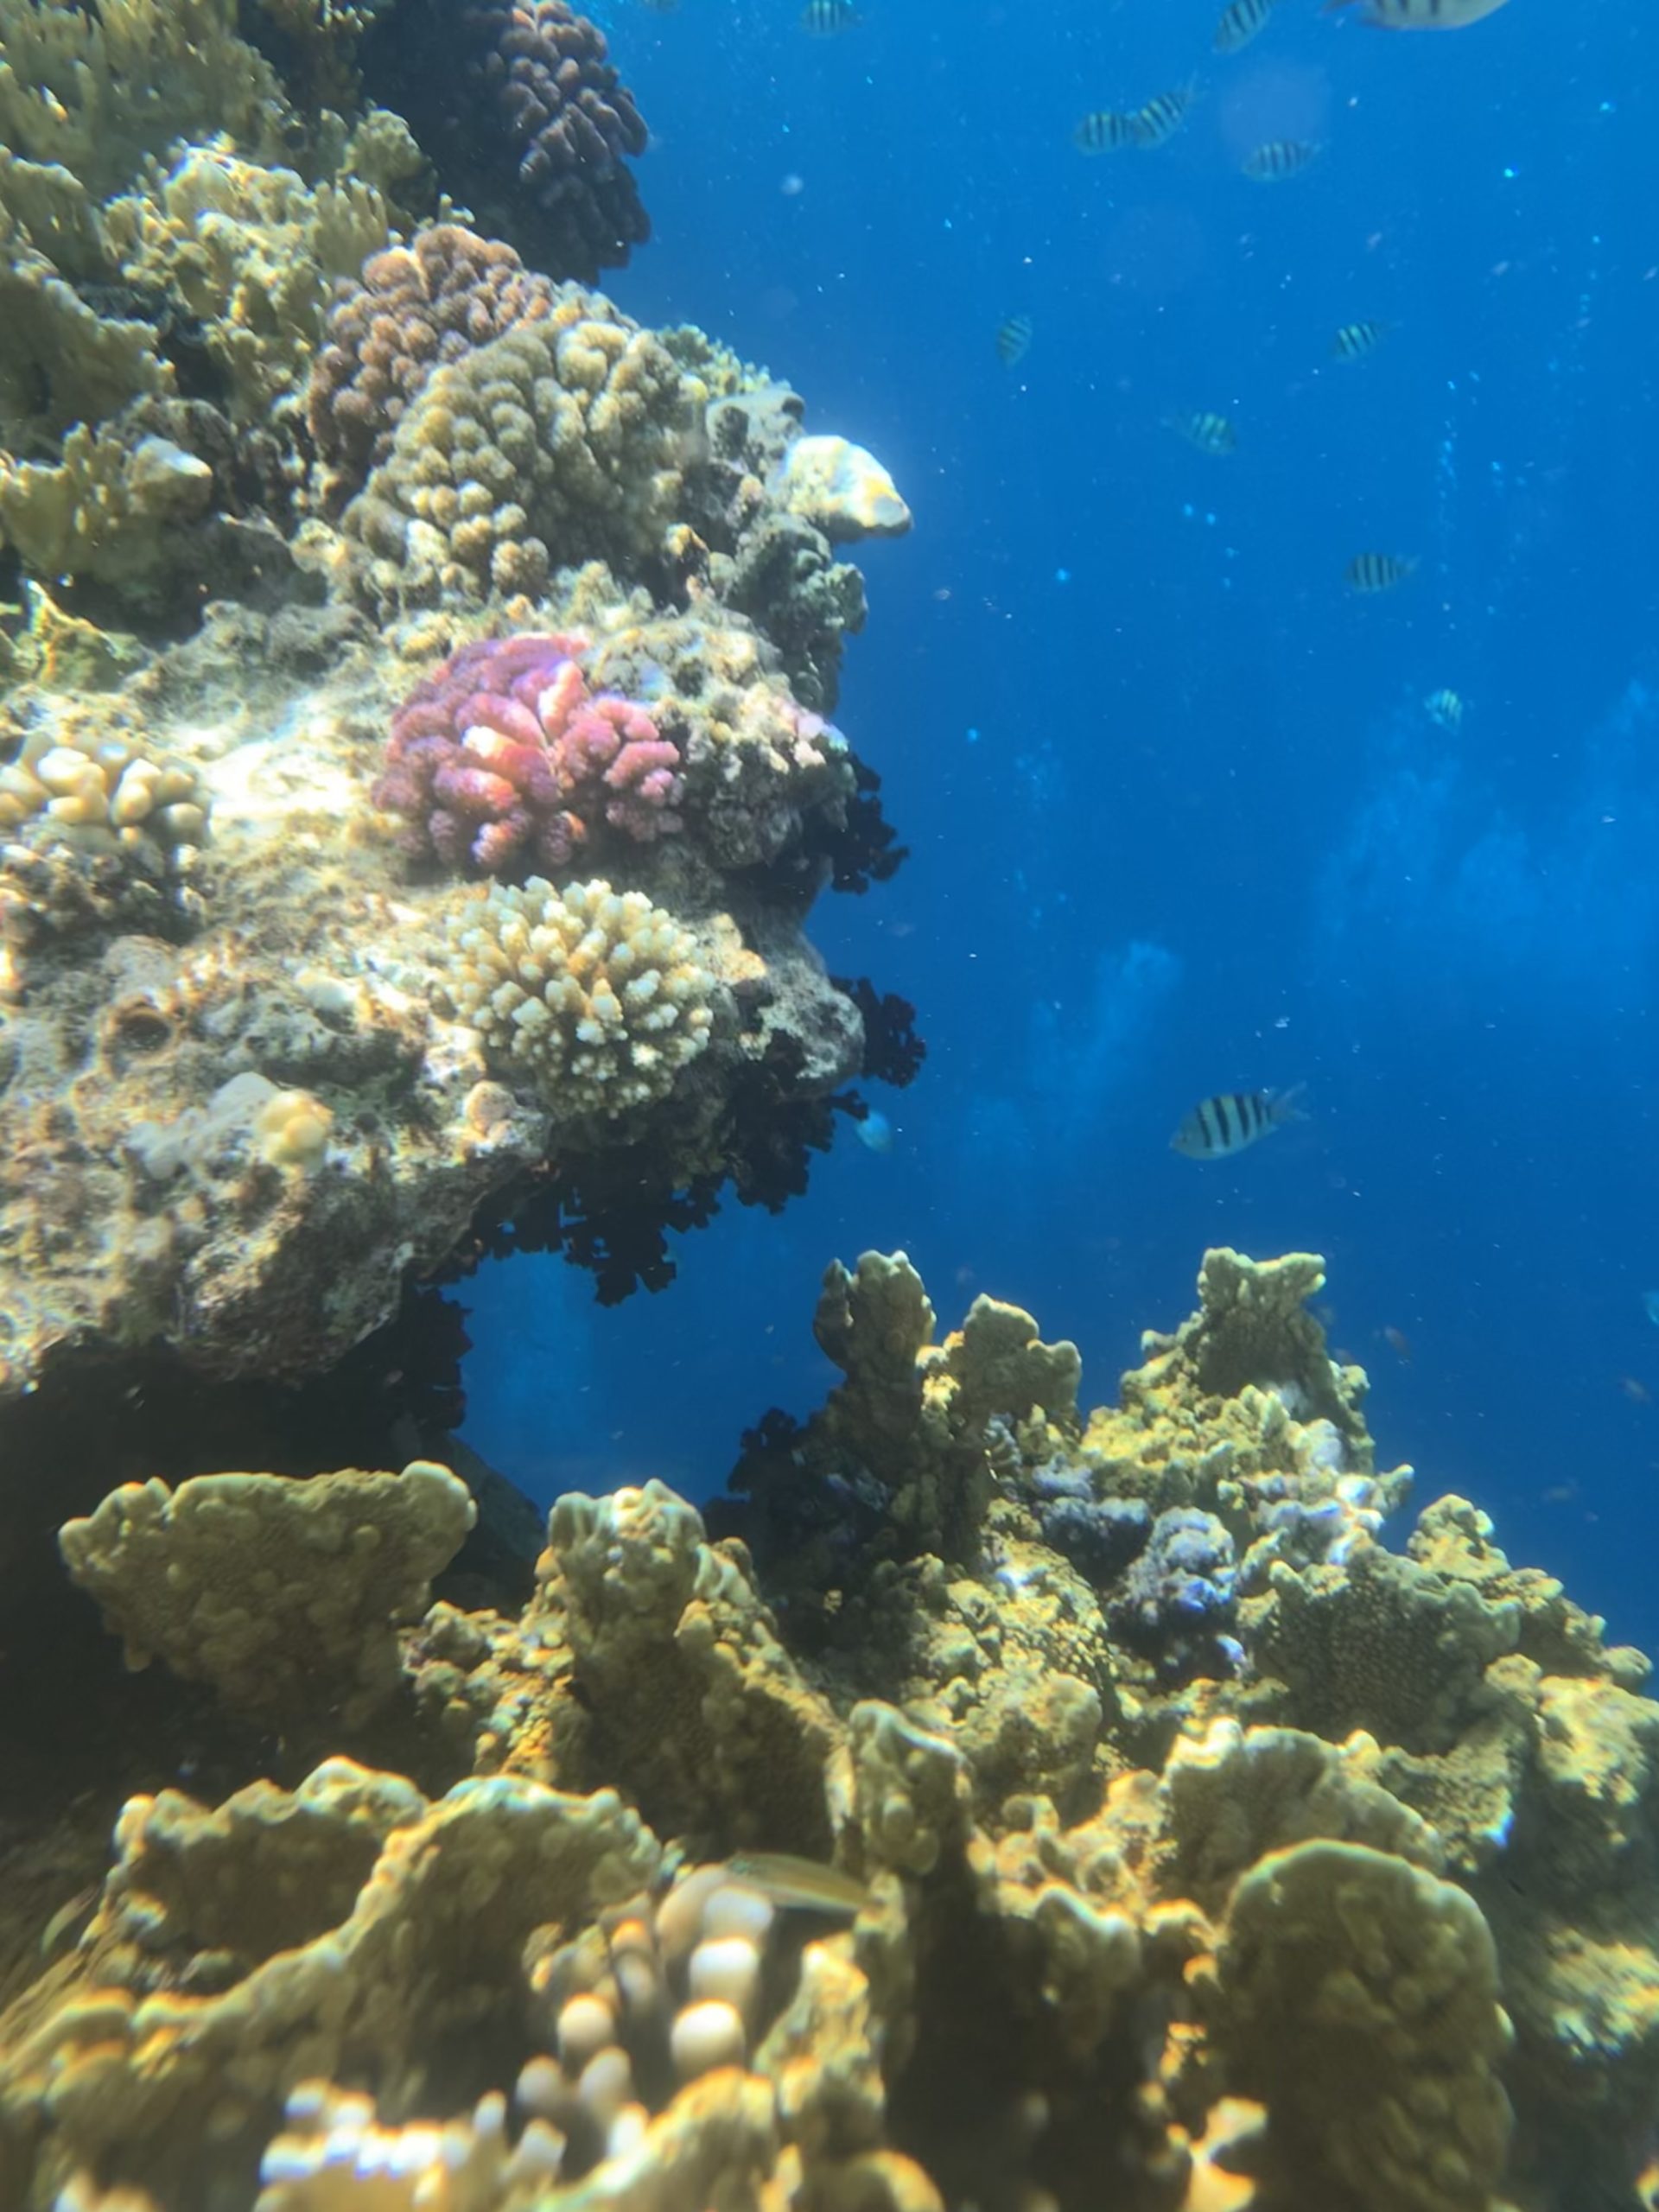 the coral reefs of the northern Red Sea on the shores of Sharm El-Sheikh, where COP27 was held, seen here, are also vulnerable to the effects of climate change.